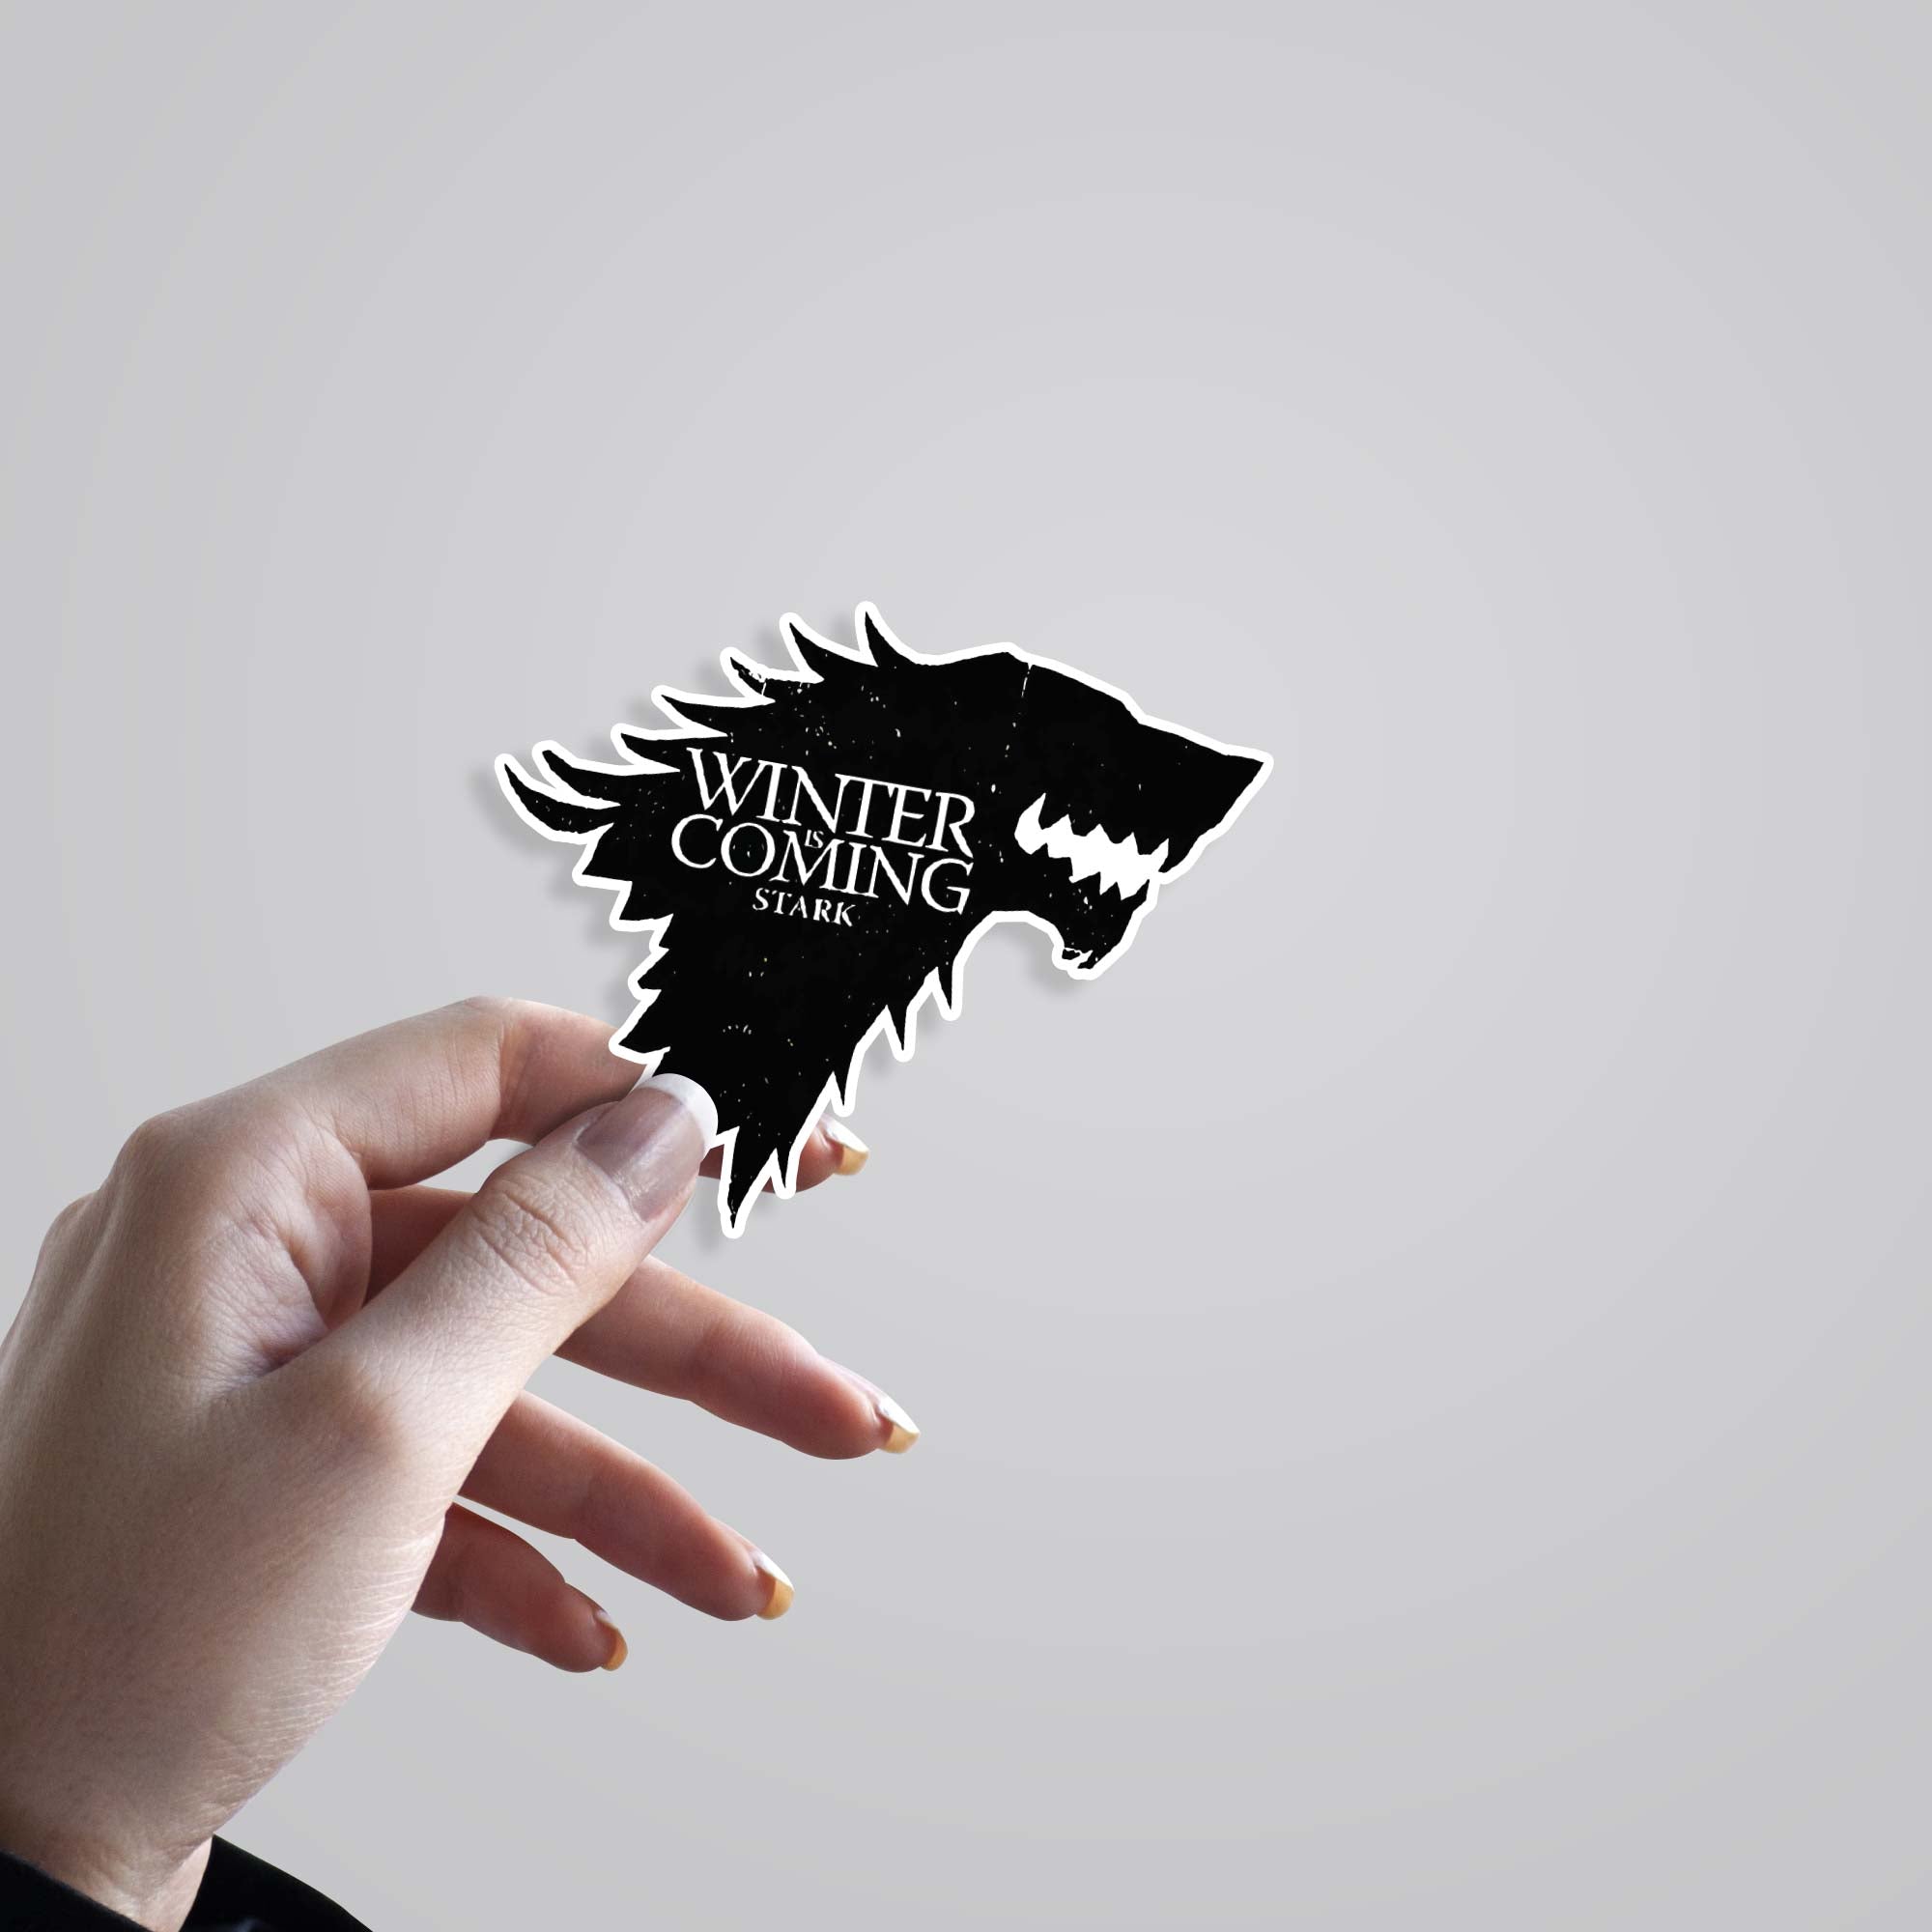 Winter is Coming Stark TV Shows Stickers